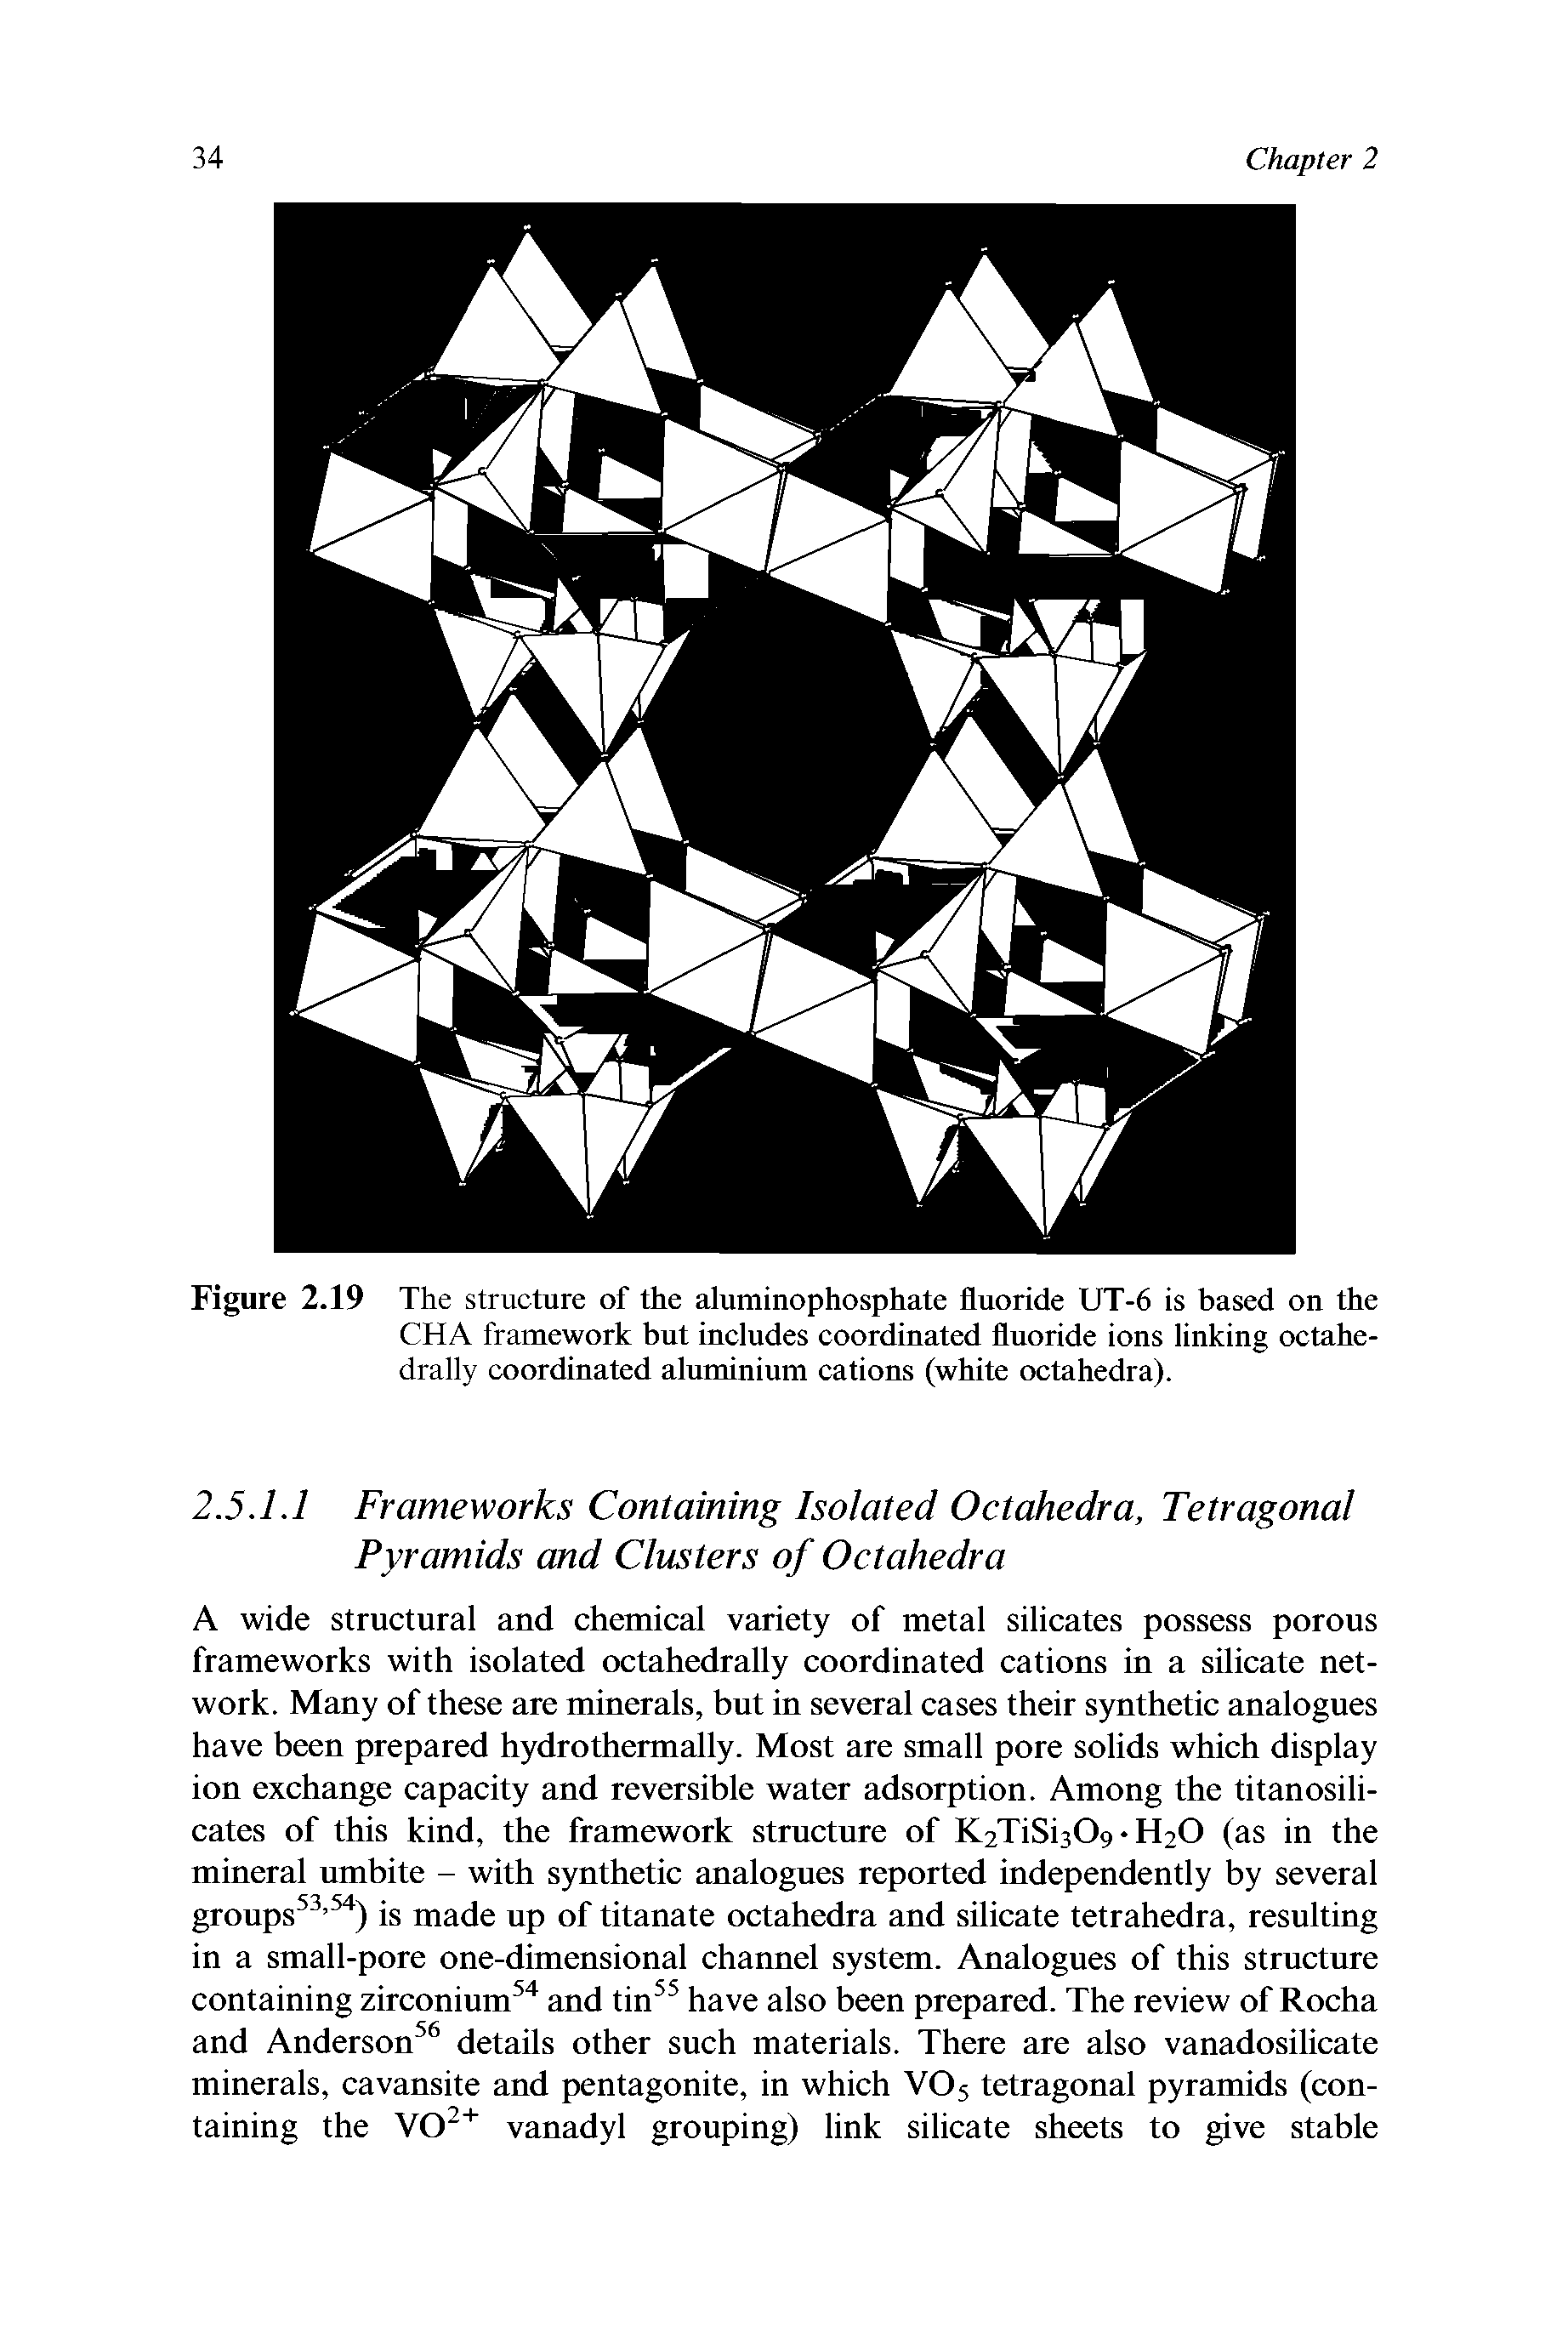 Figure 2.19 The structure of the aluminophosphate fluoride UT-6 is based on the CHA framework but includes coordinated fluoride ions linking octahe-drally coordinated aluminium cations (white octahedra).